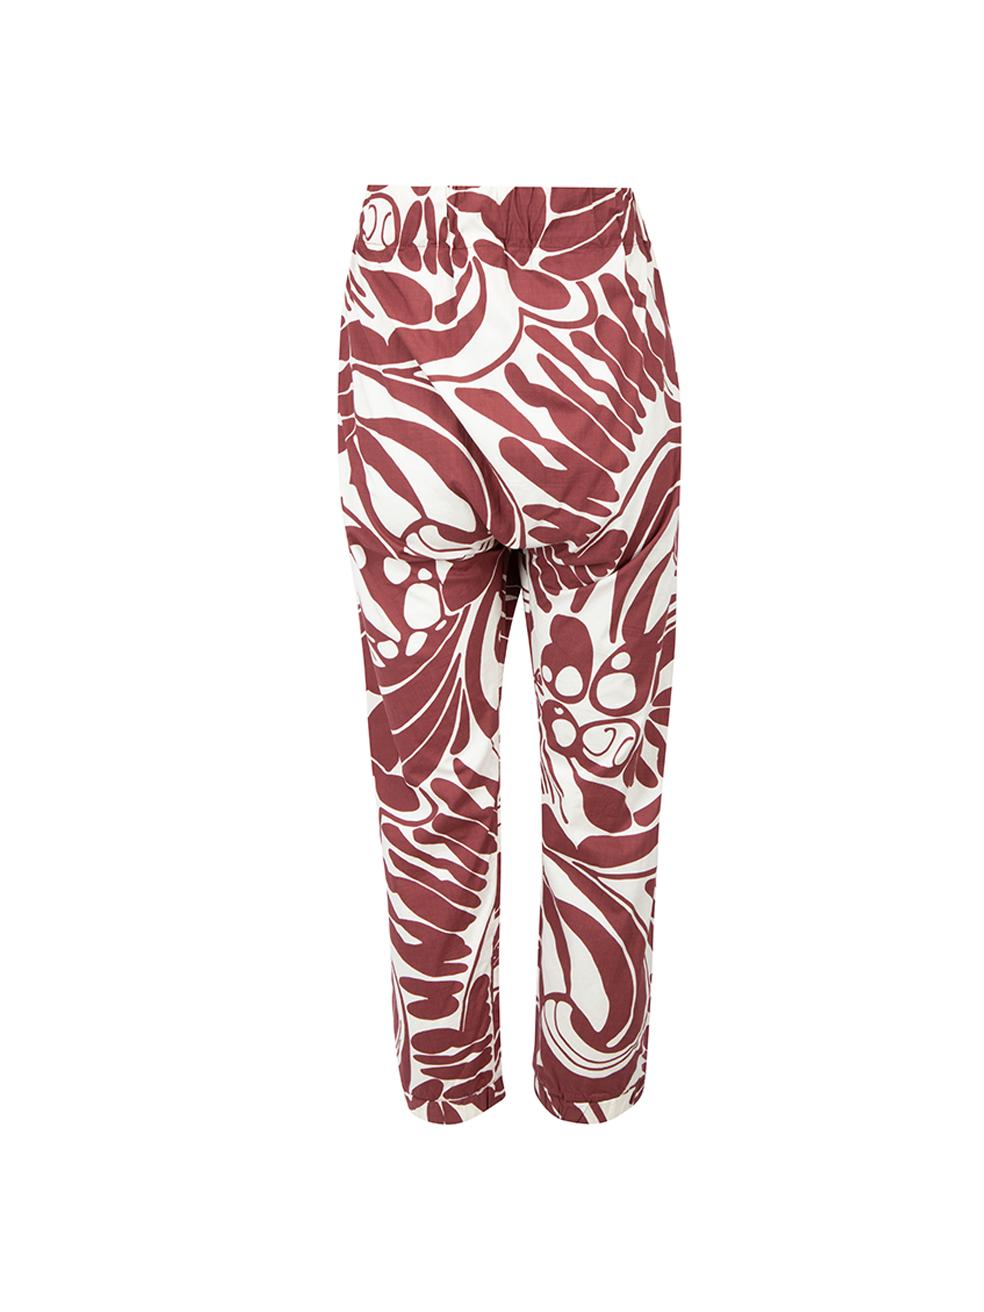 Marni Women's Maroon Printed Cropped Trousers In Good Condition For Sale In London, GB